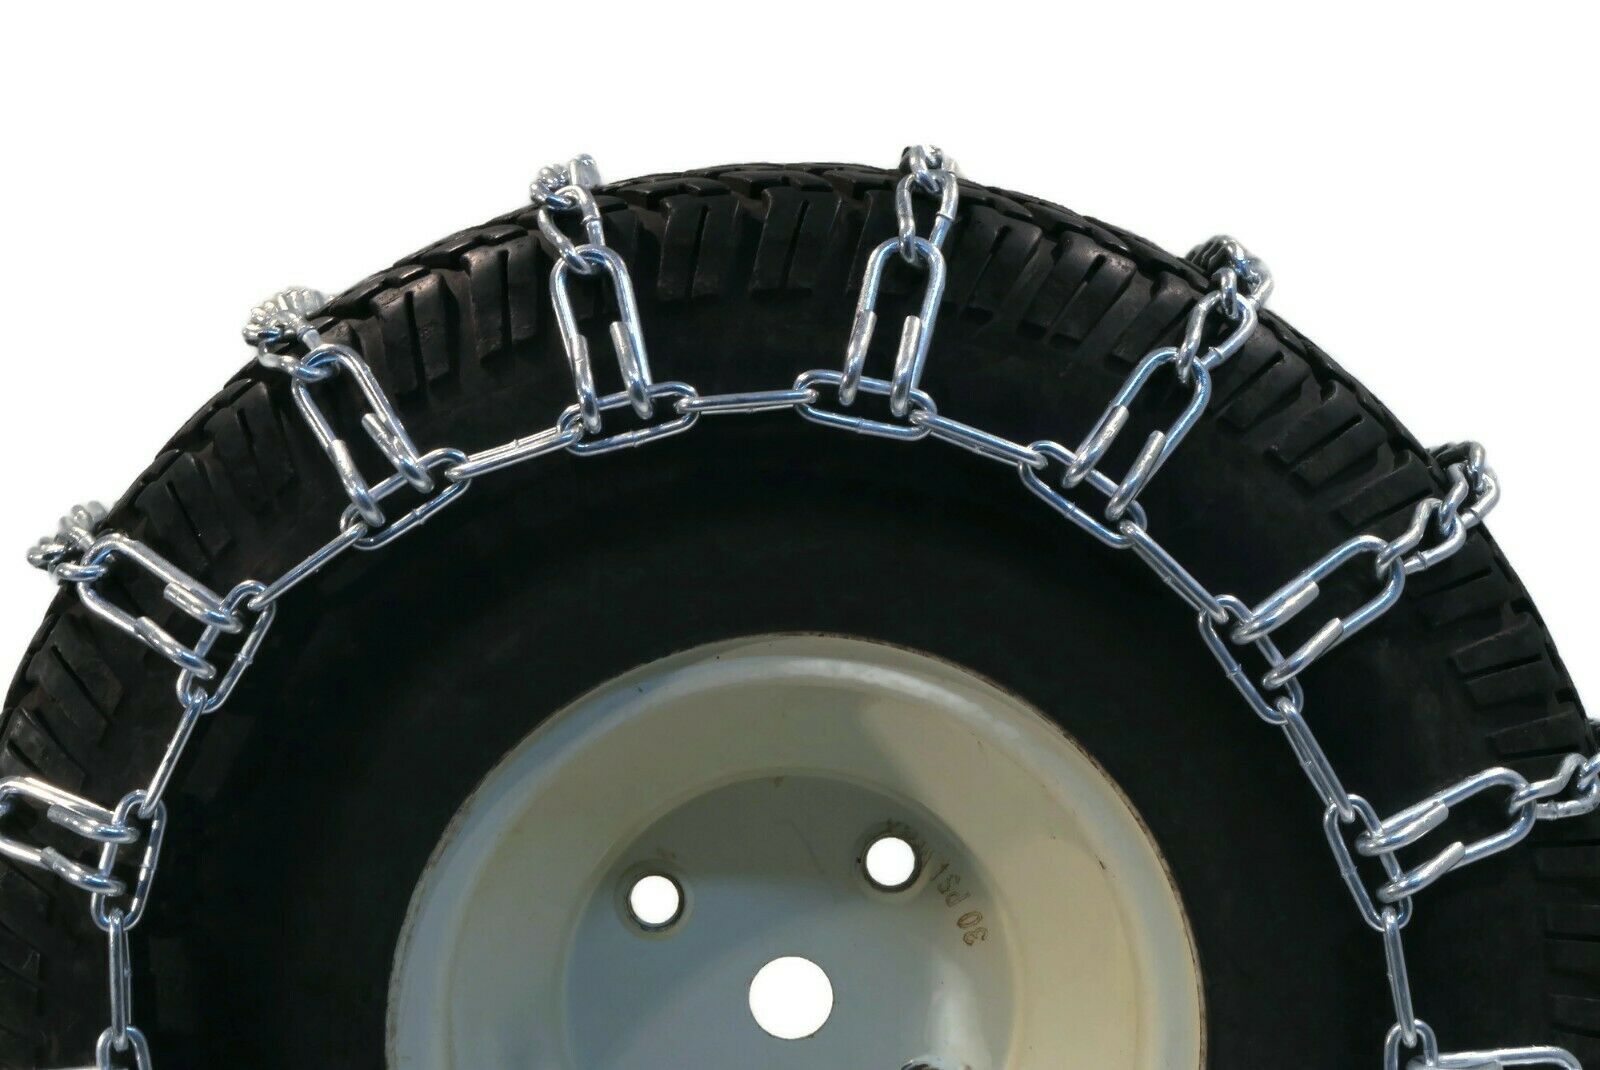 The ROP Shop | Pair of 2 Link Tire Chains 16x6.5x8 For Cub Cadet LawnMower, Snowblower, Thrower - image 4 of 6